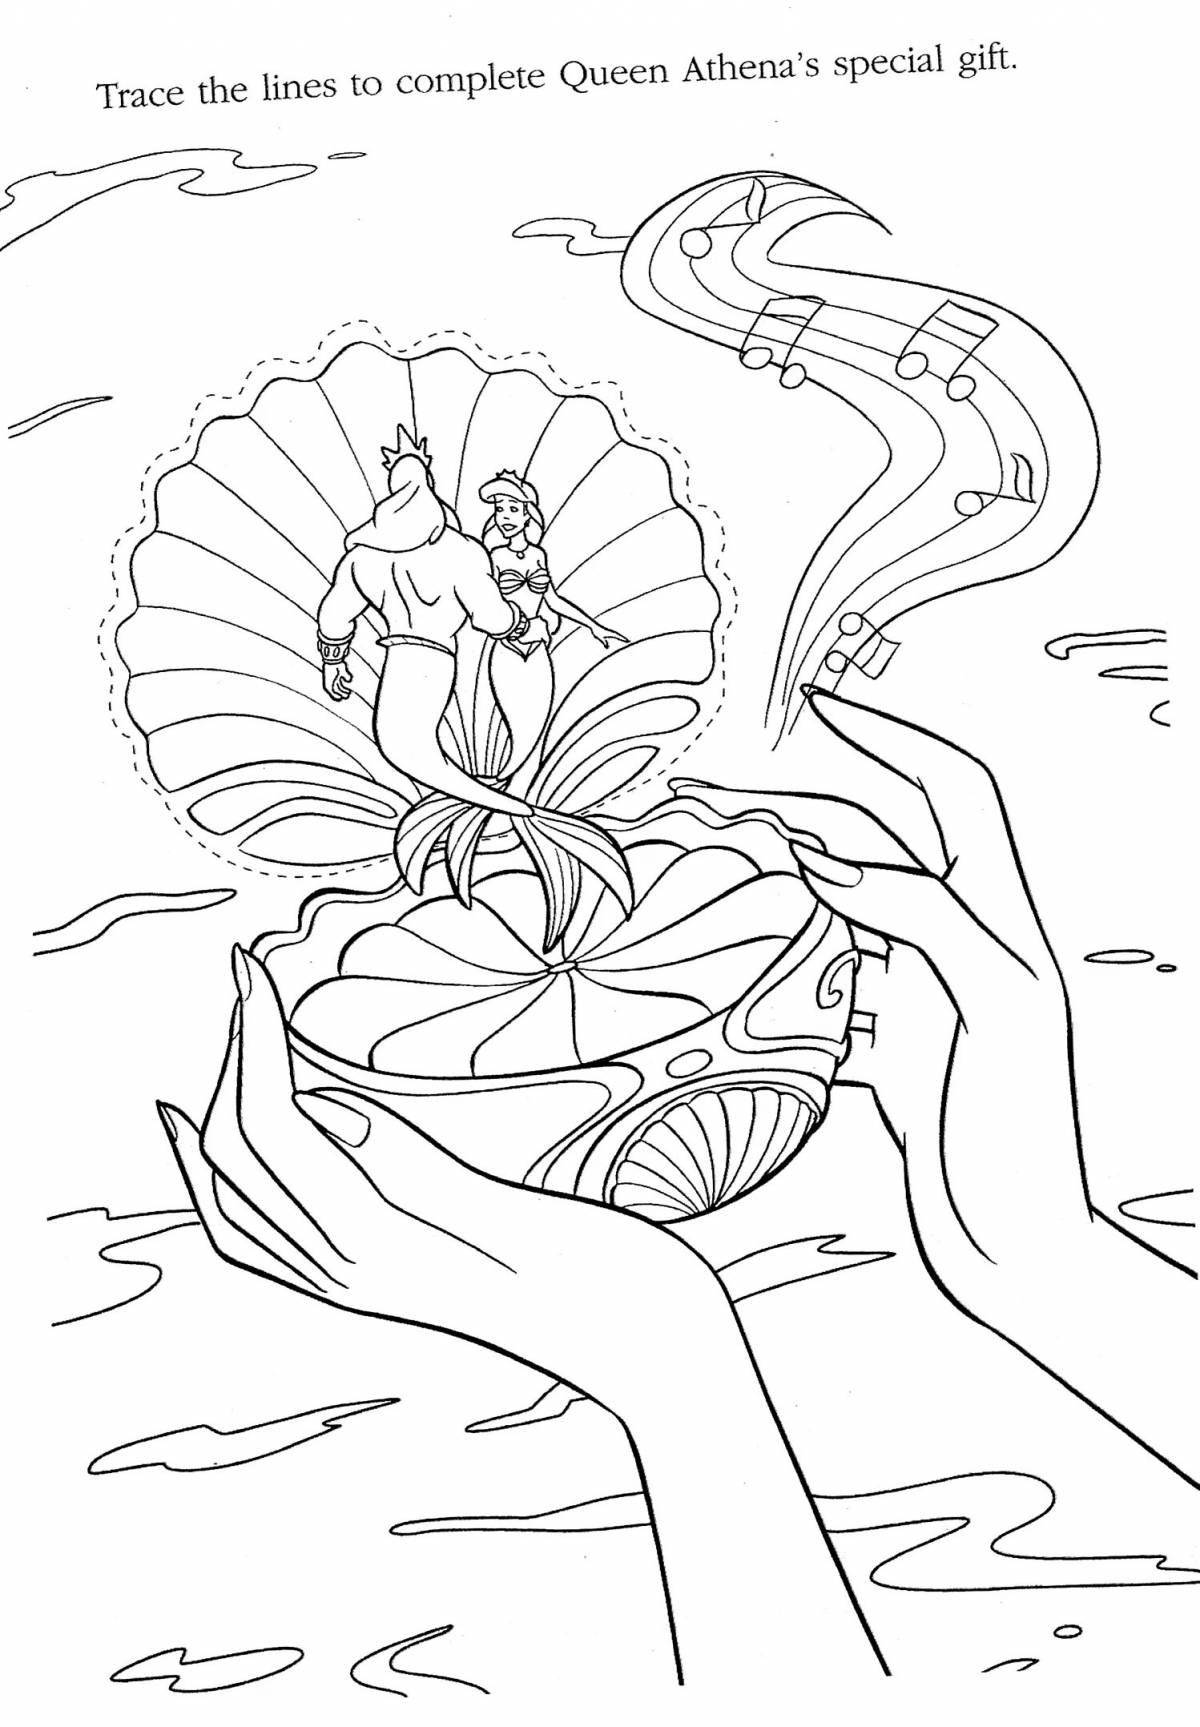 Playful music box coloring page